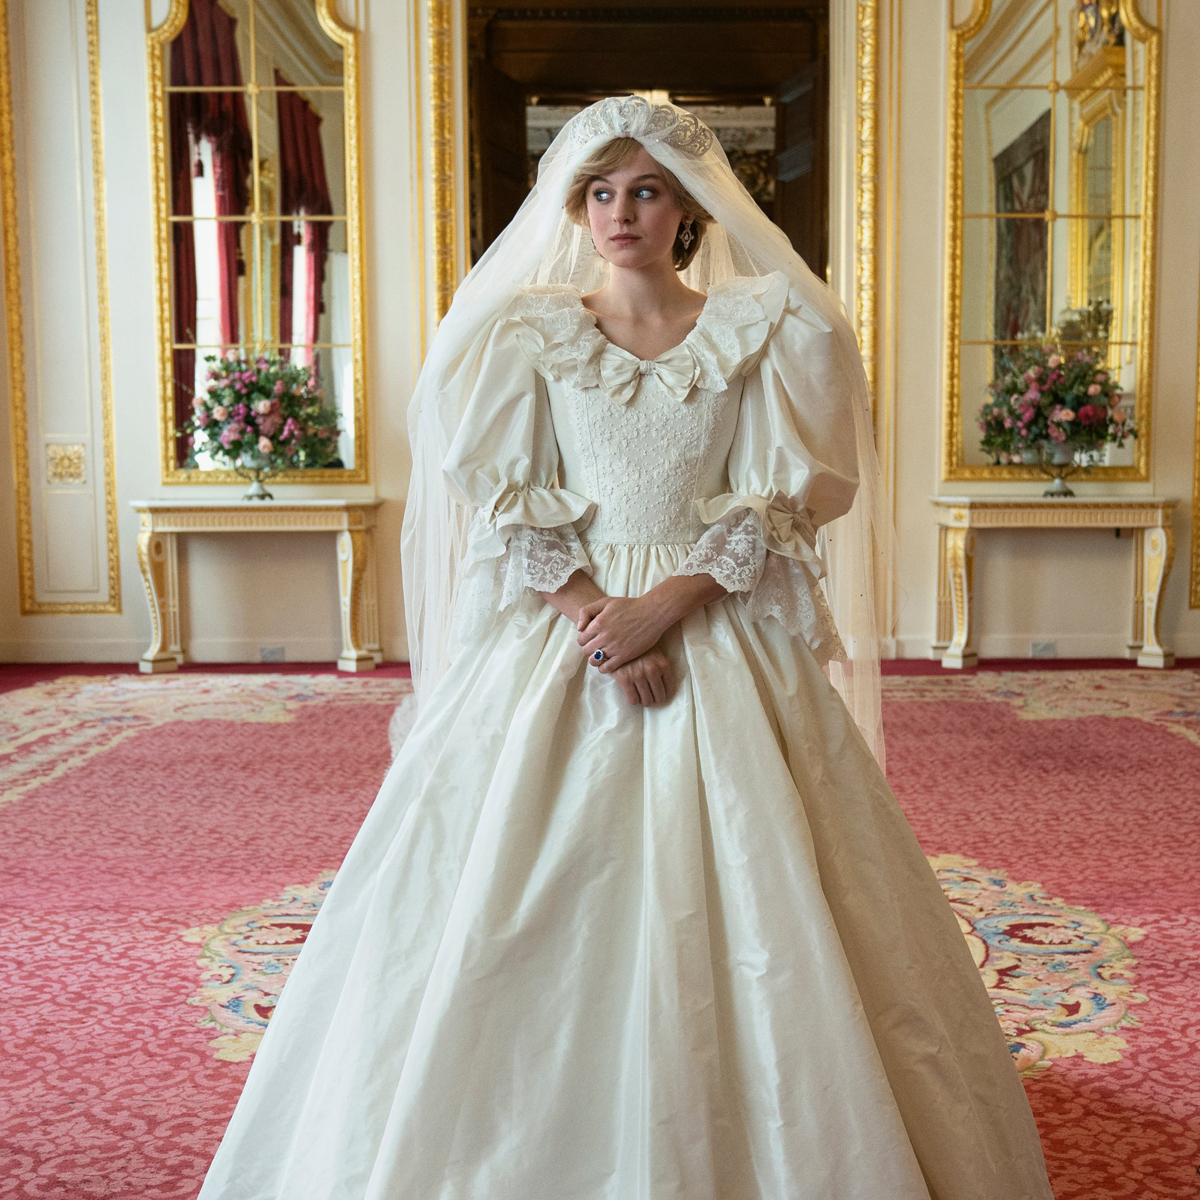 The Crown Released the First Photo of Diana's Wedding Dress